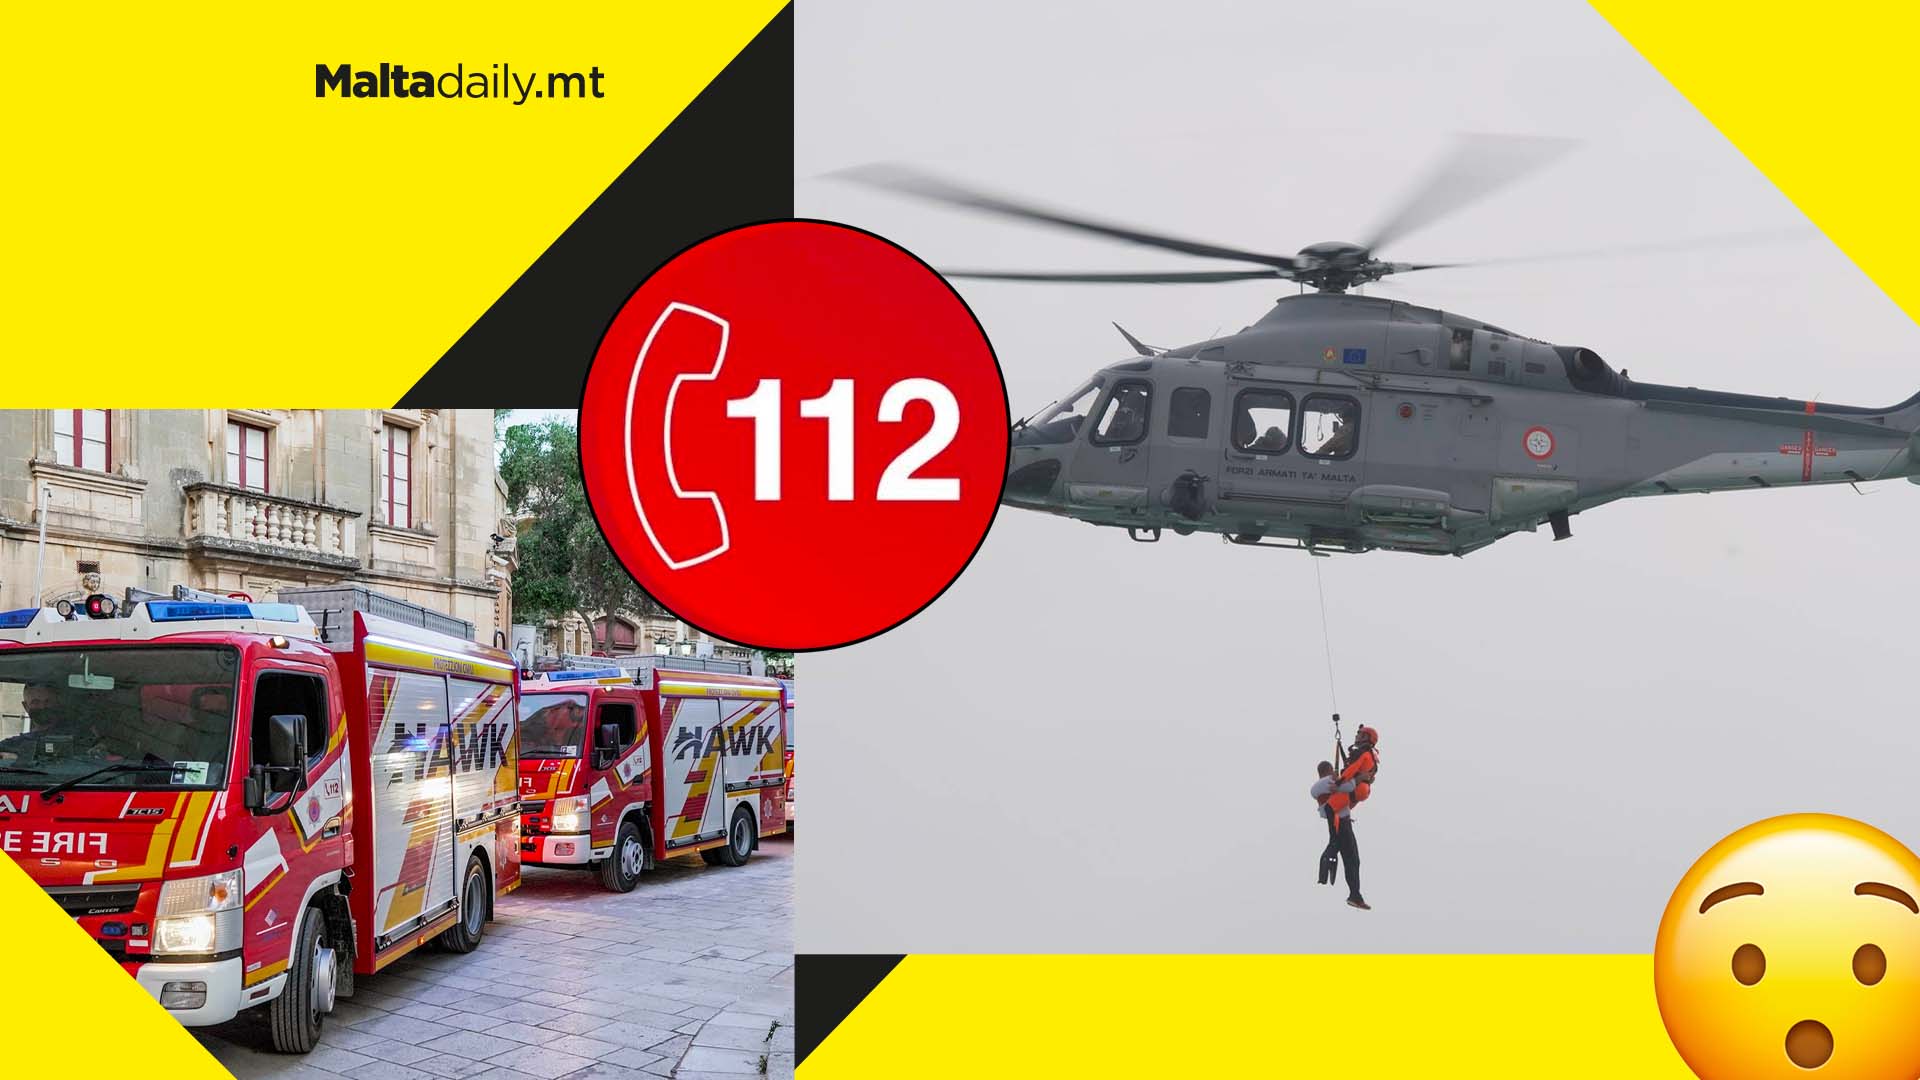 The 112 mobile app sends help directly to you in case of emergency